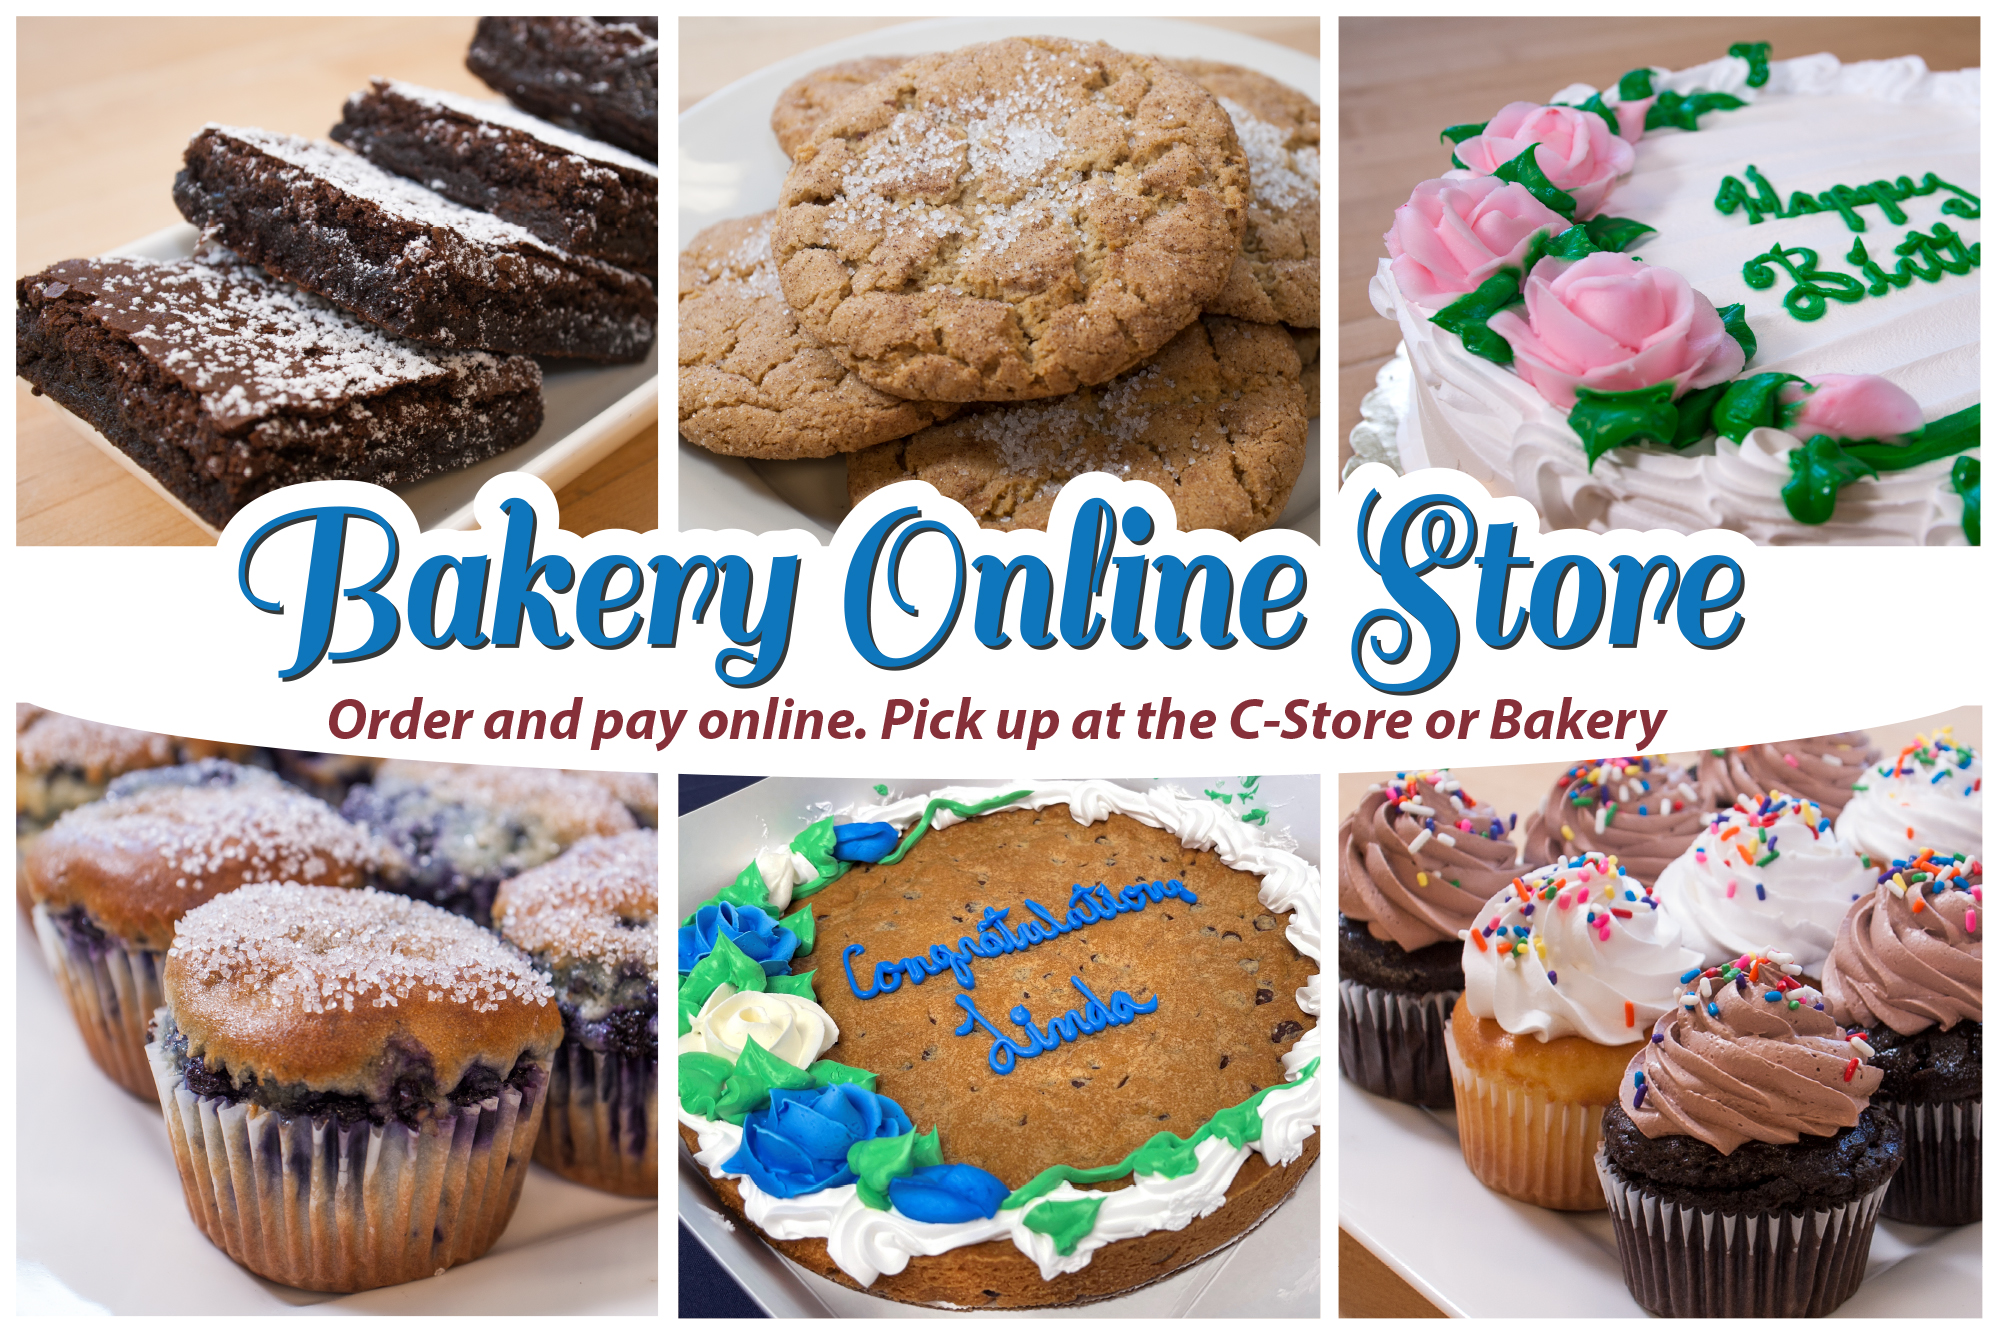 Anyone can order cakes, and baked goods, including gluten free from the UConn Bakery online store and pick up their order at the Student Union Convenience Store. 1 week notice is required